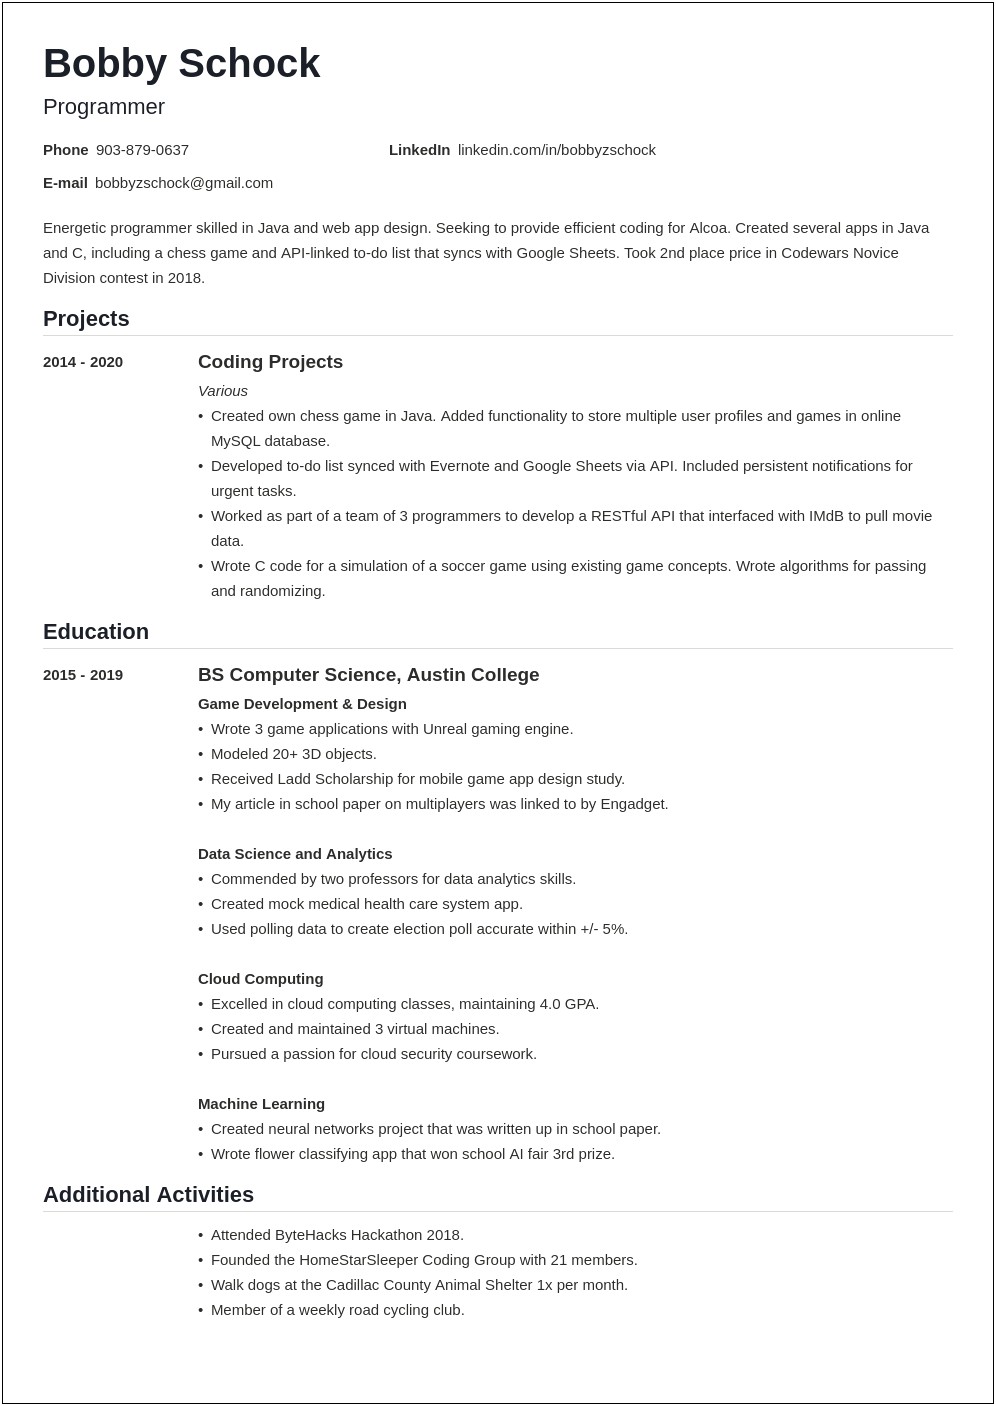 Resume Example With No Objective